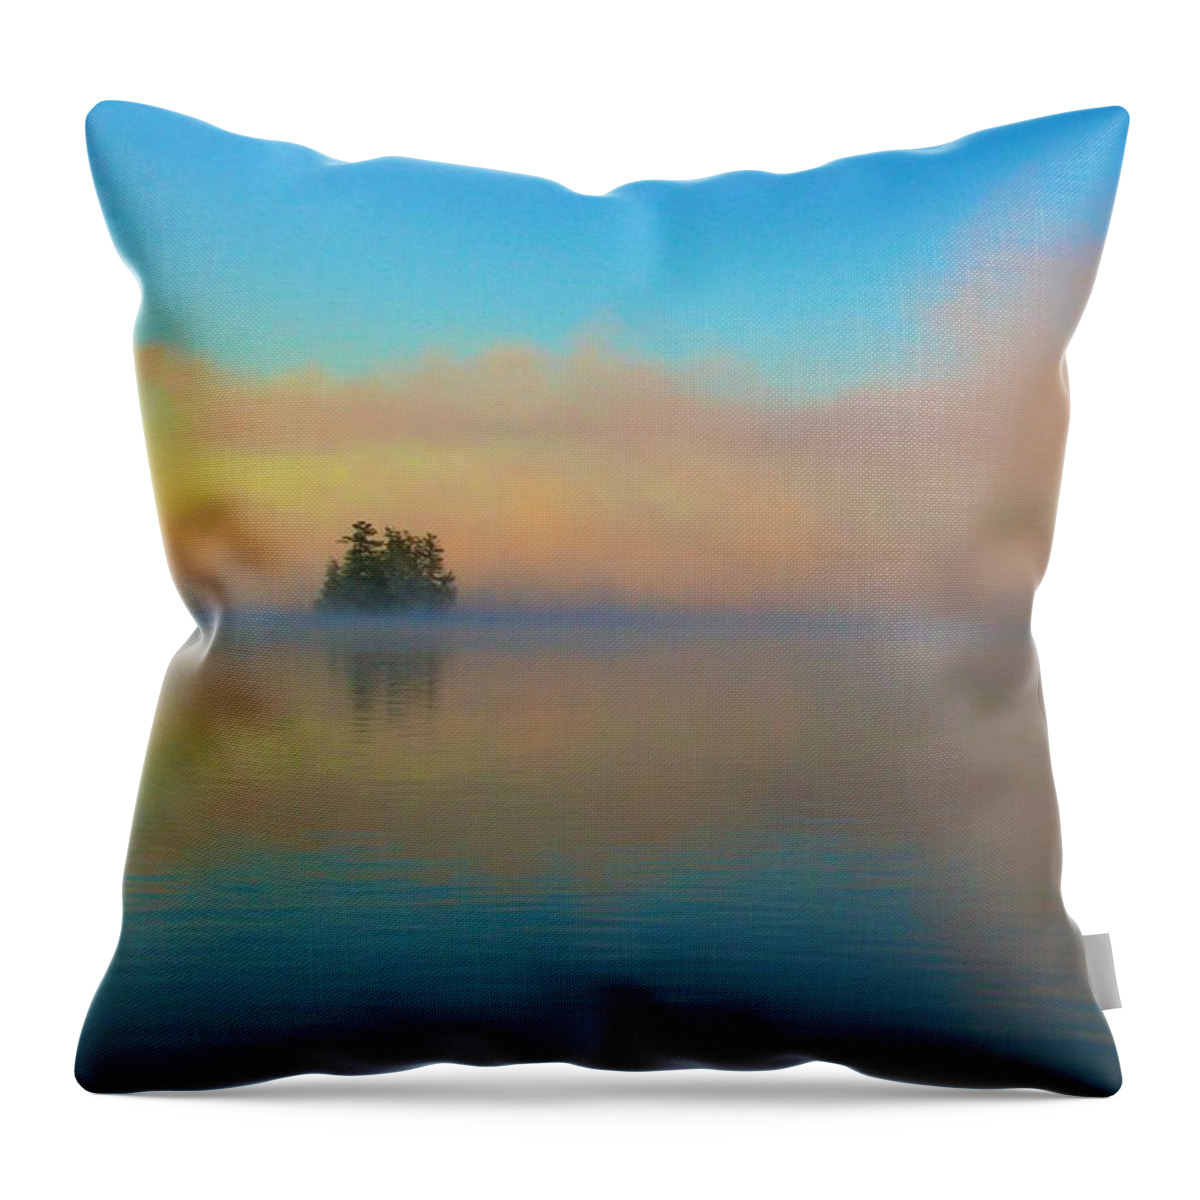  Throw Pillow featuring the photograph Cherry Island in Misty Sunrise by Polly Castor